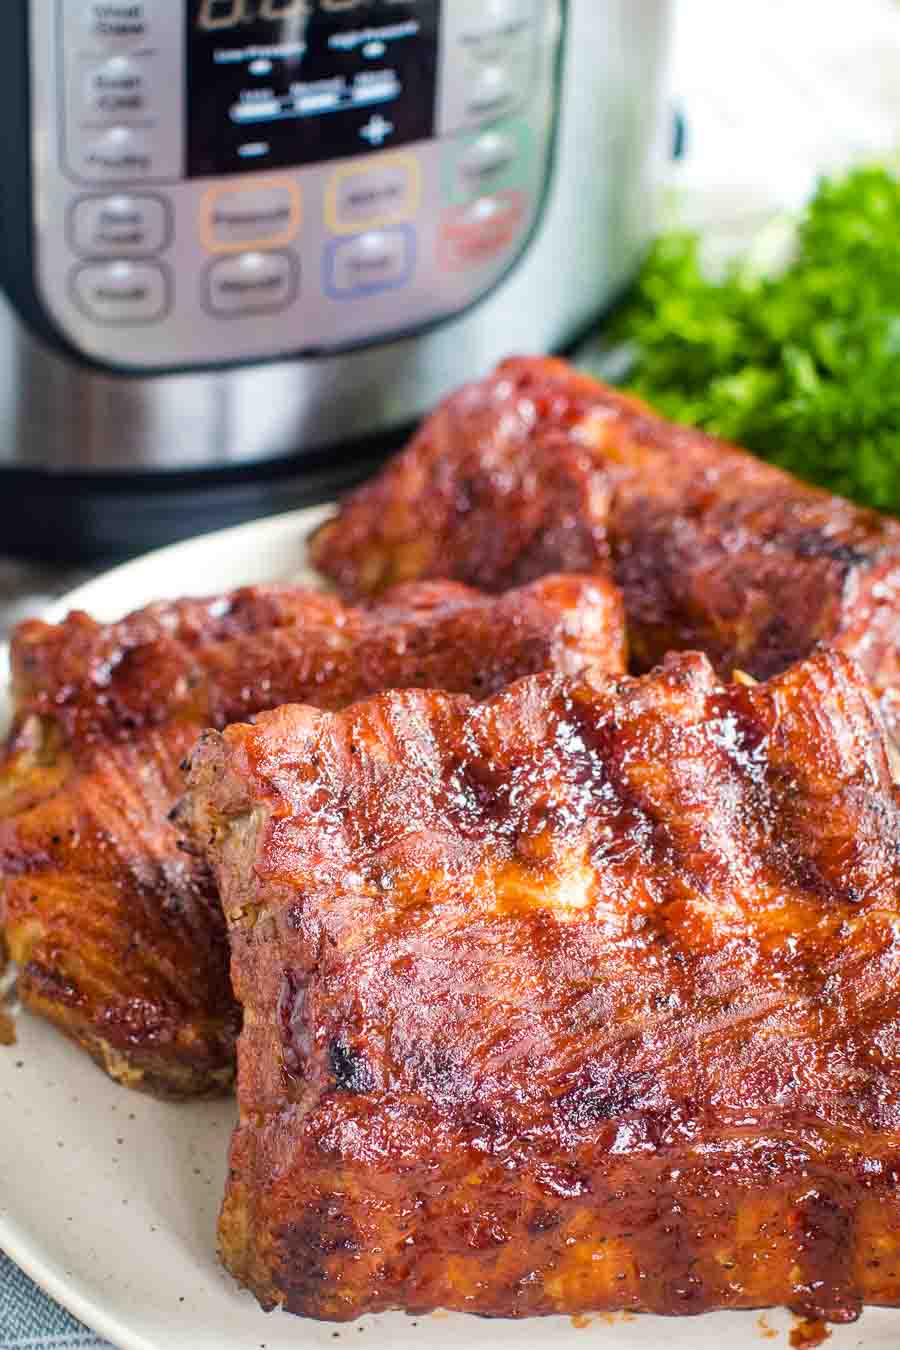 A plate with ribs on it and an Instant Pot in background